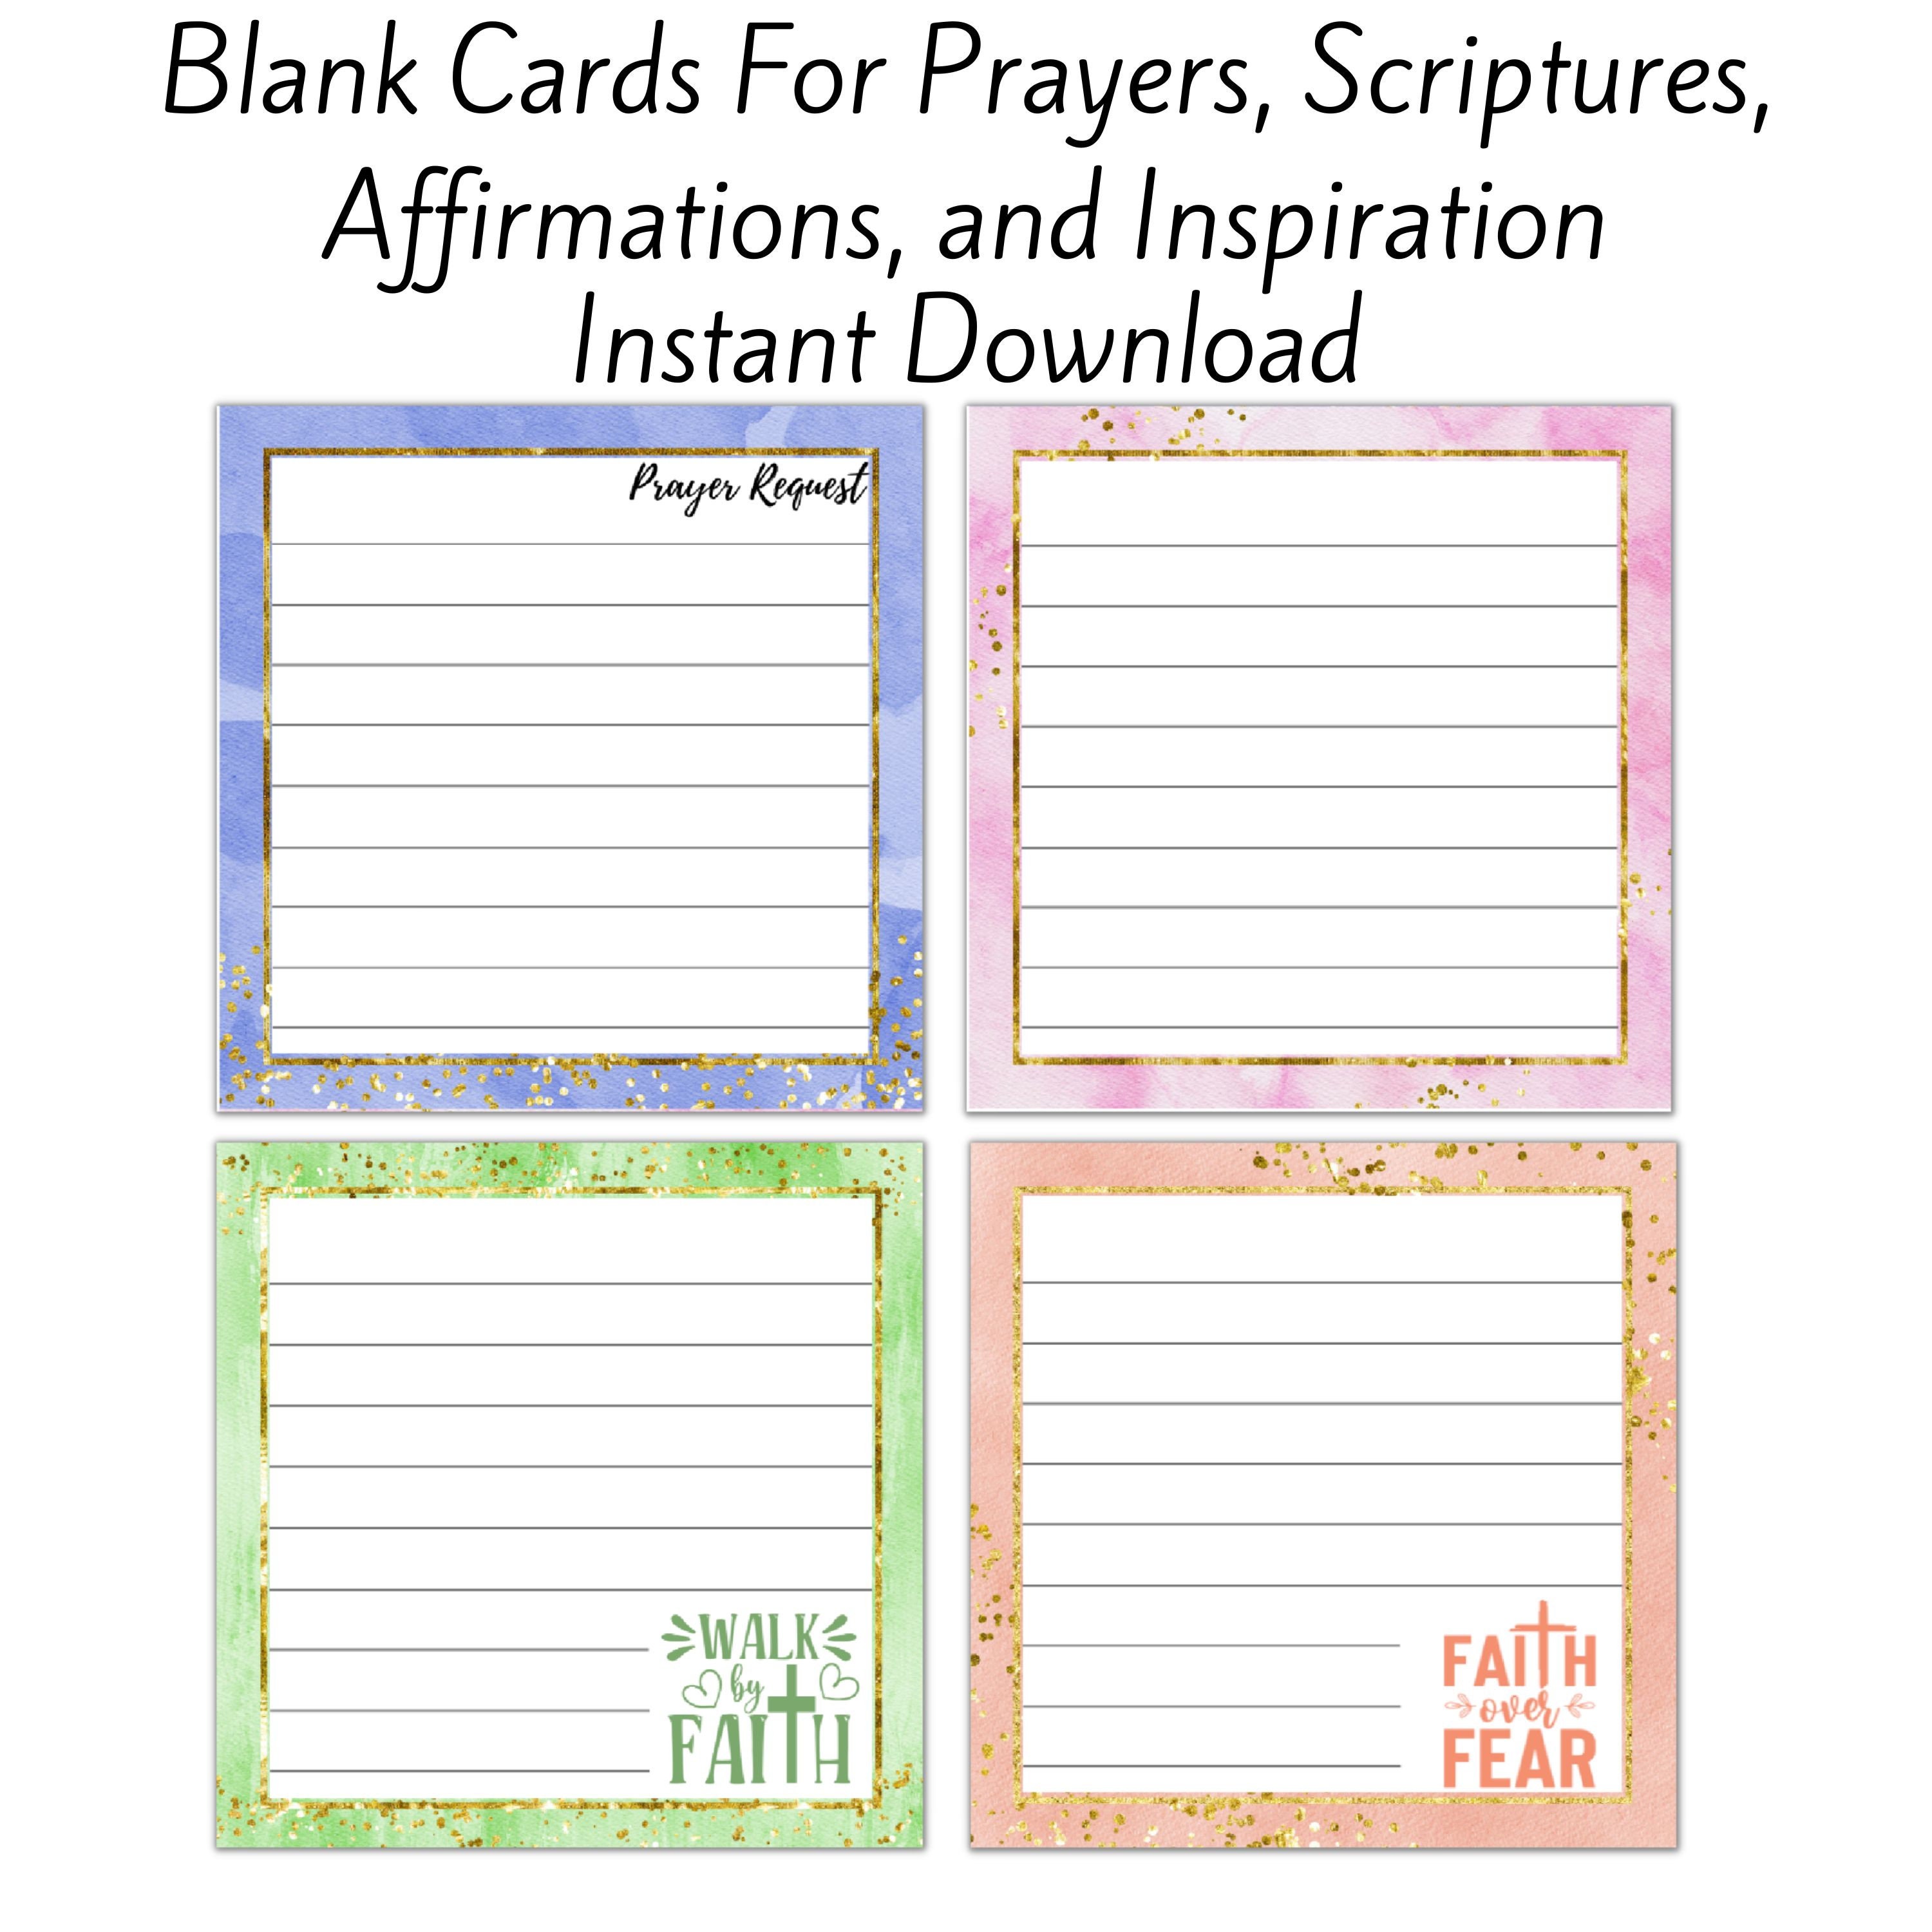 Blank Cards Blank Scripture Cards Blank Prayer Request Cards Journaling  Cards Affirmation Cards Note Cards Ephemera Cards 